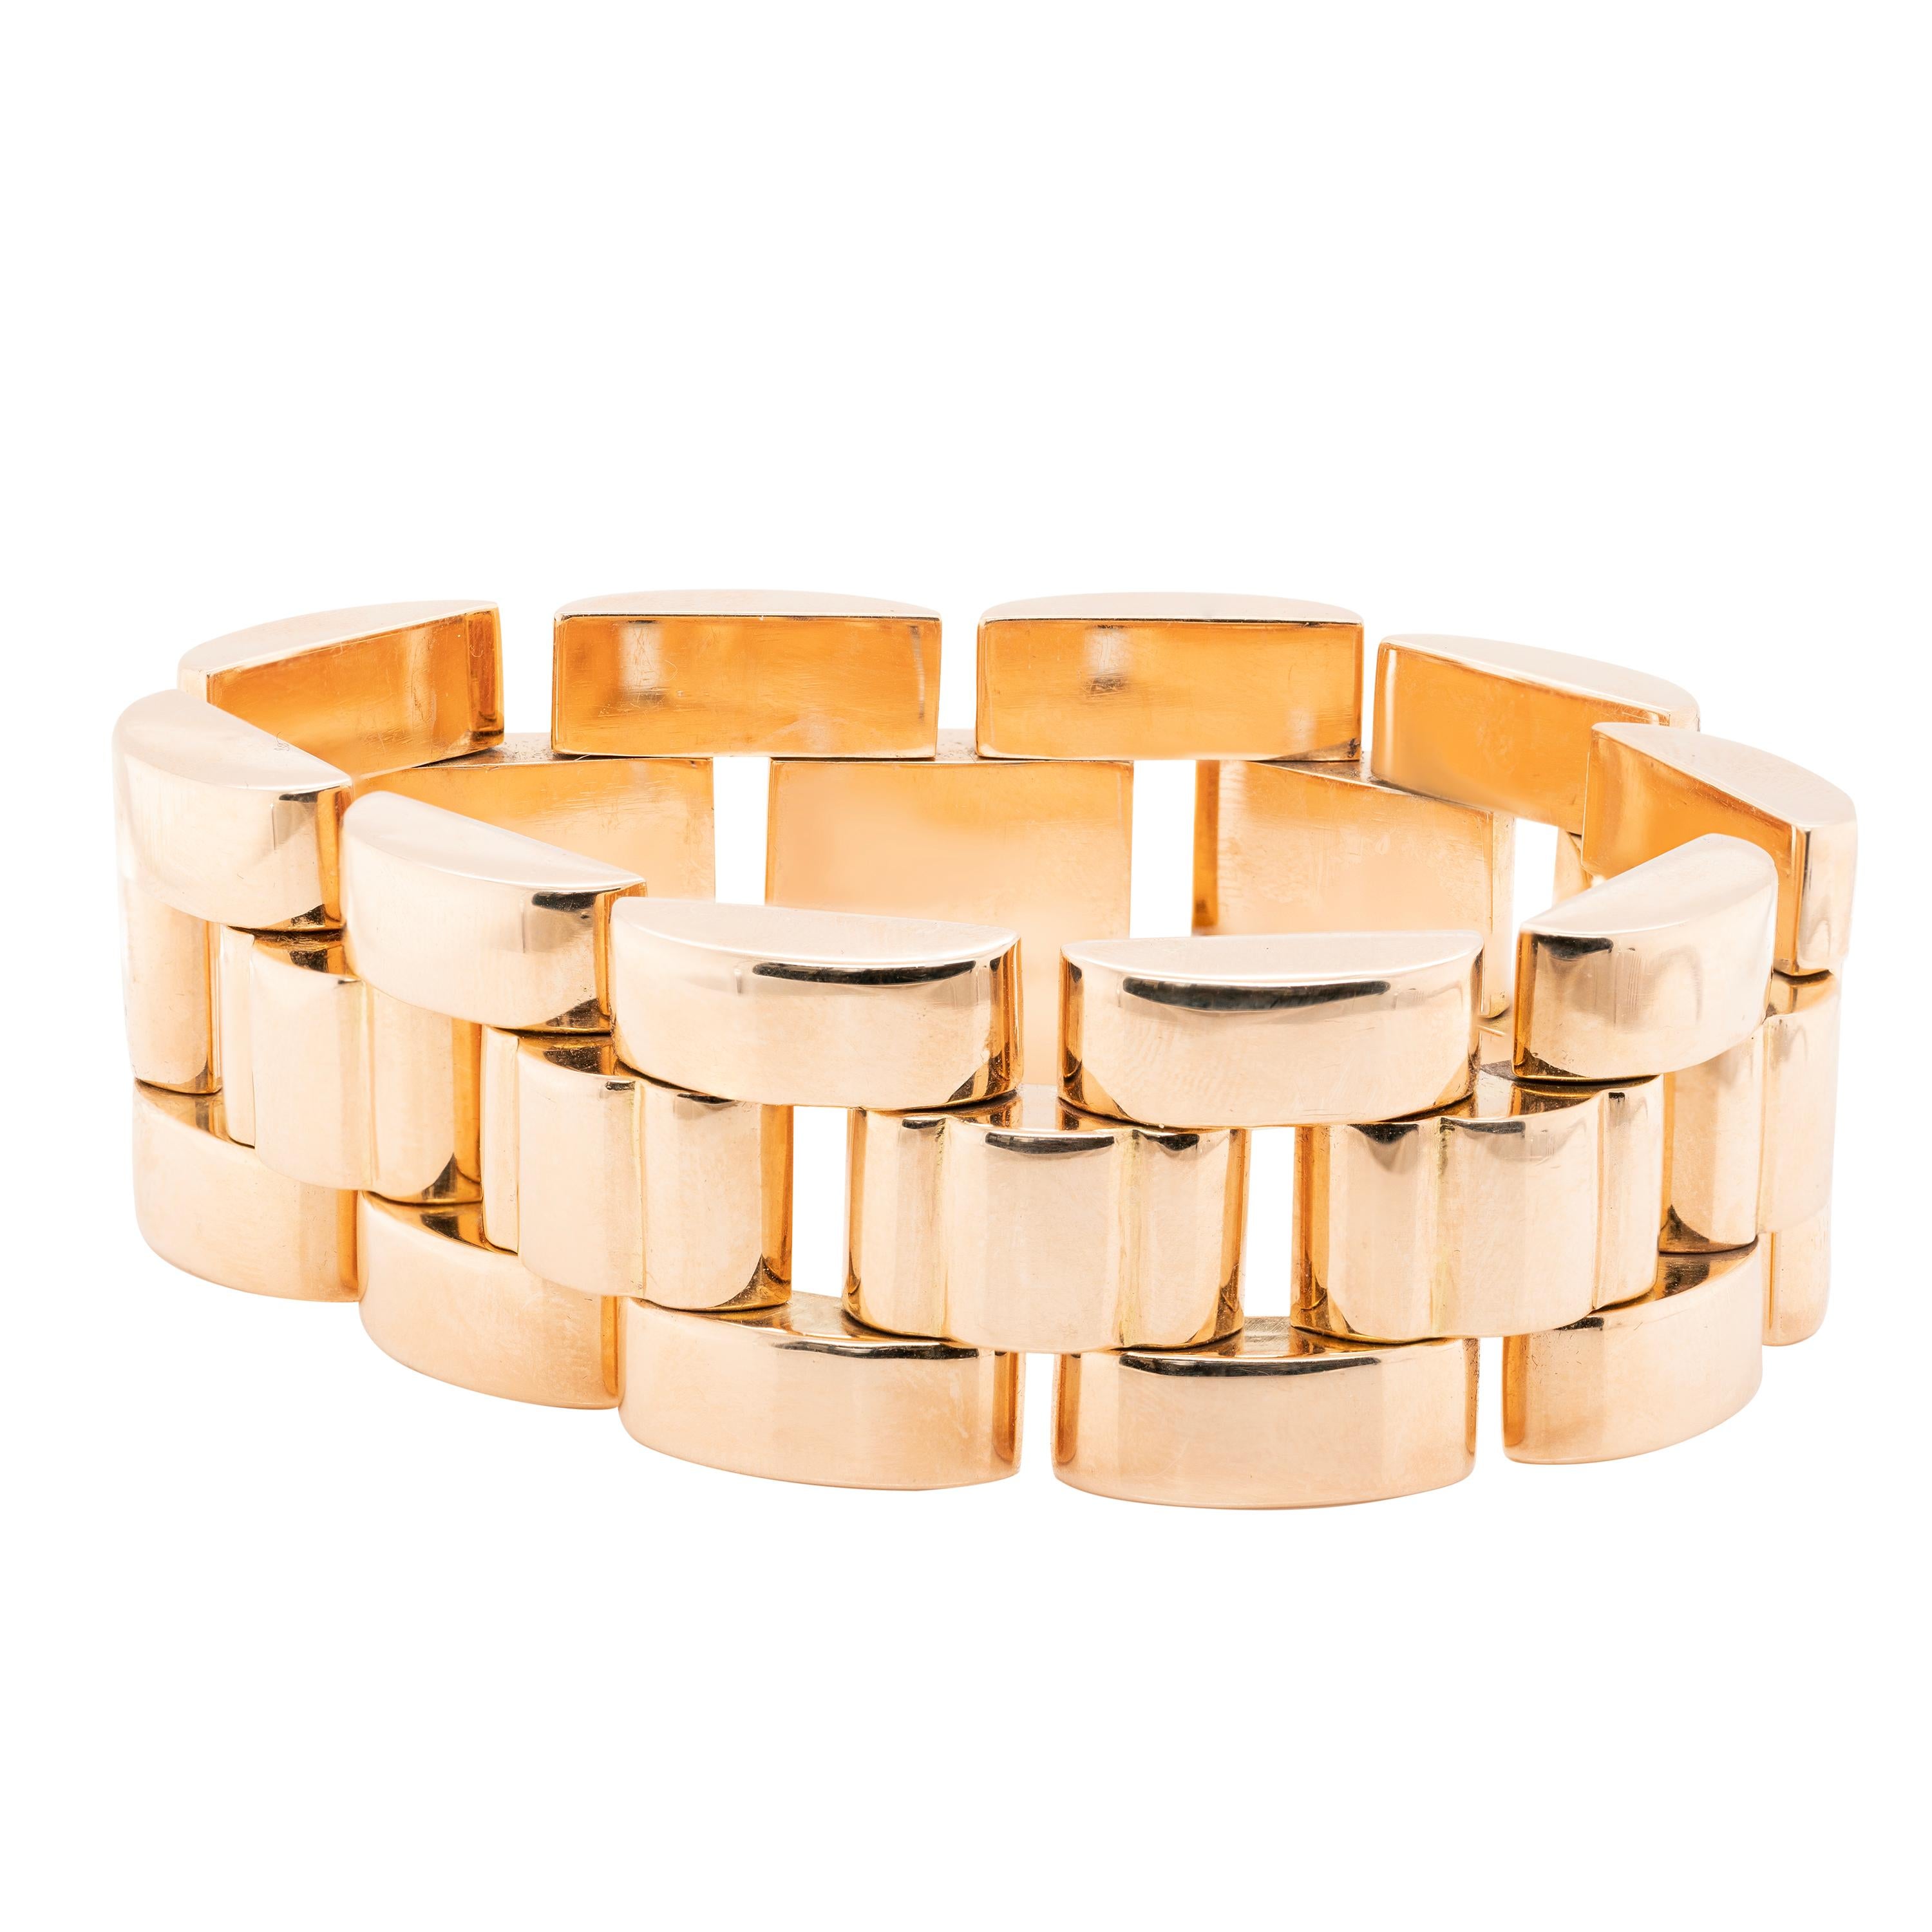 This gorgeous wide bracelet is beautifully designed as an articulated series of high polish 18 carat yellow gold convex links and secures with a box clasp. Tank bracelets, popular in the 20th Century, are so called because their links resemble tank